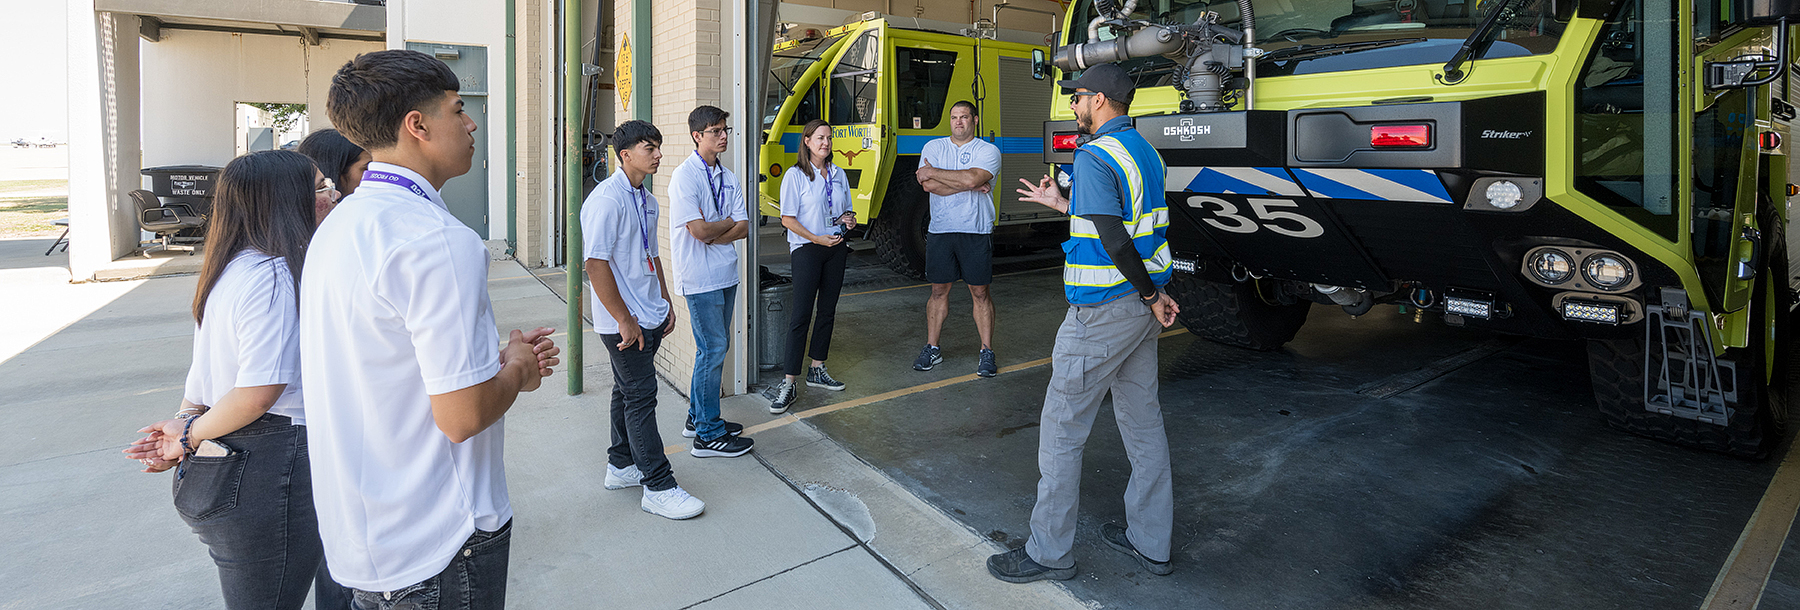 Section Image: Students on tour learning about equipment 